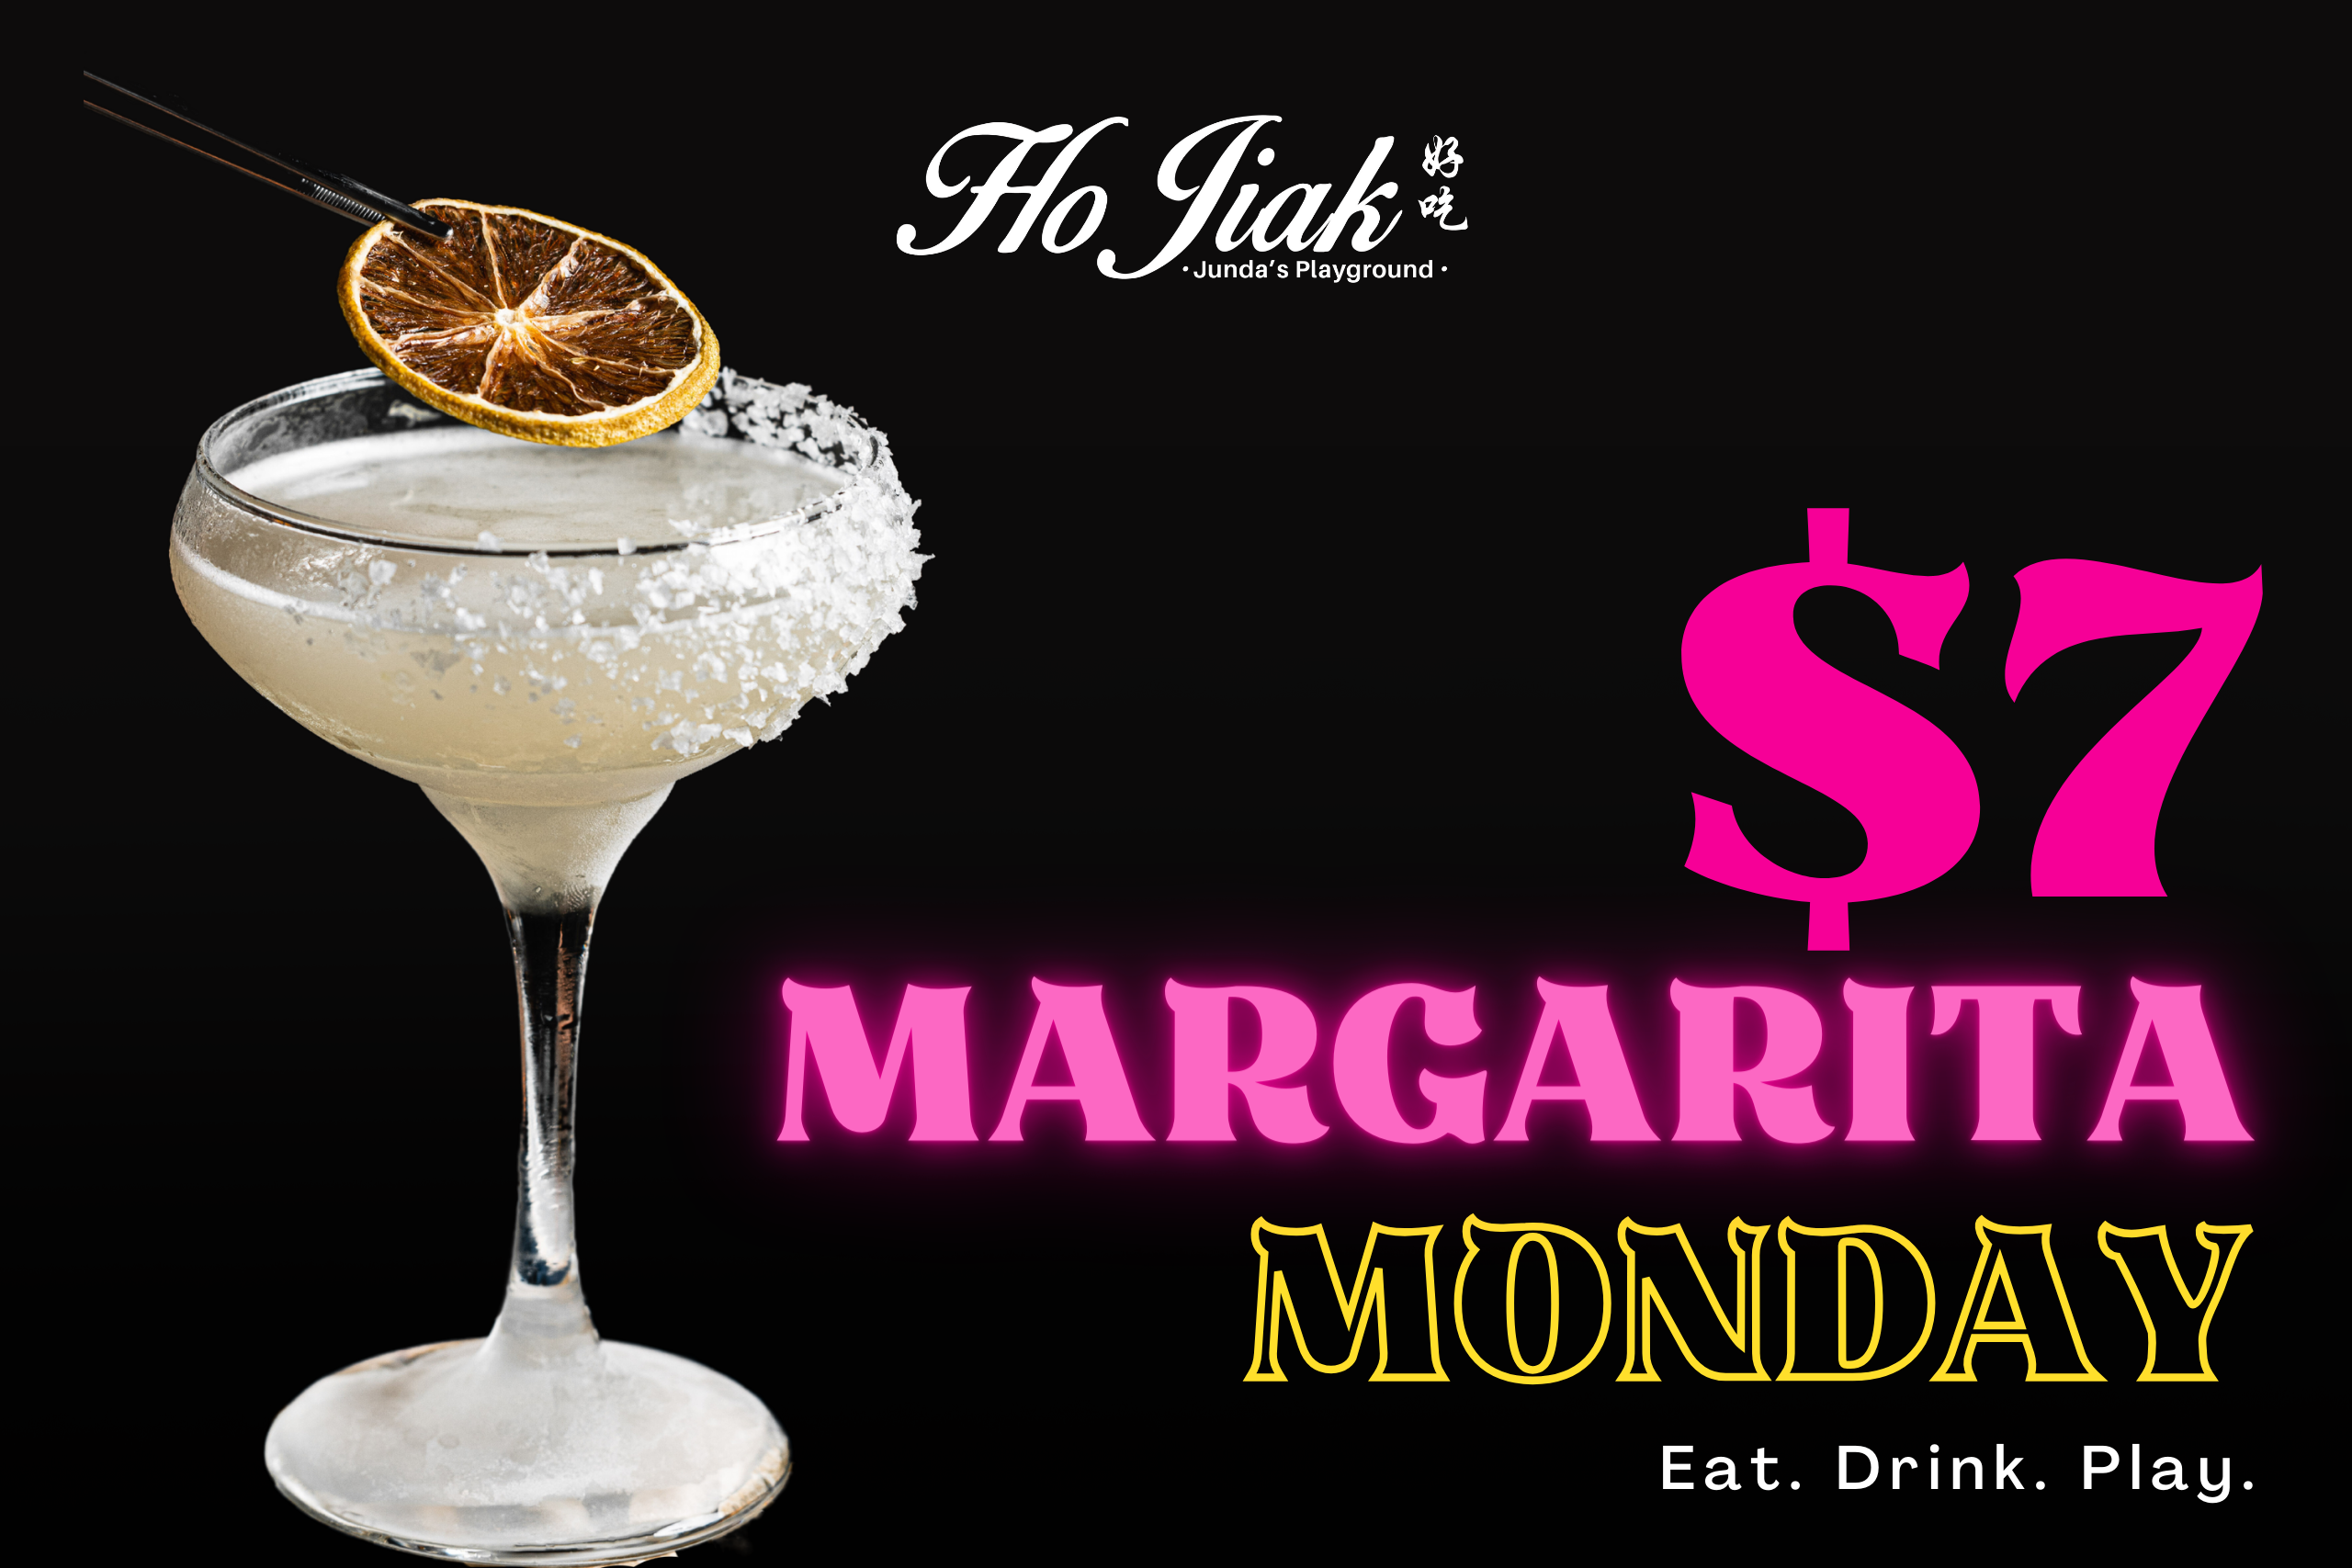 Kicking off the week with $7 Margaritas – the perfect way to turn your week into a fiesta! Book Now